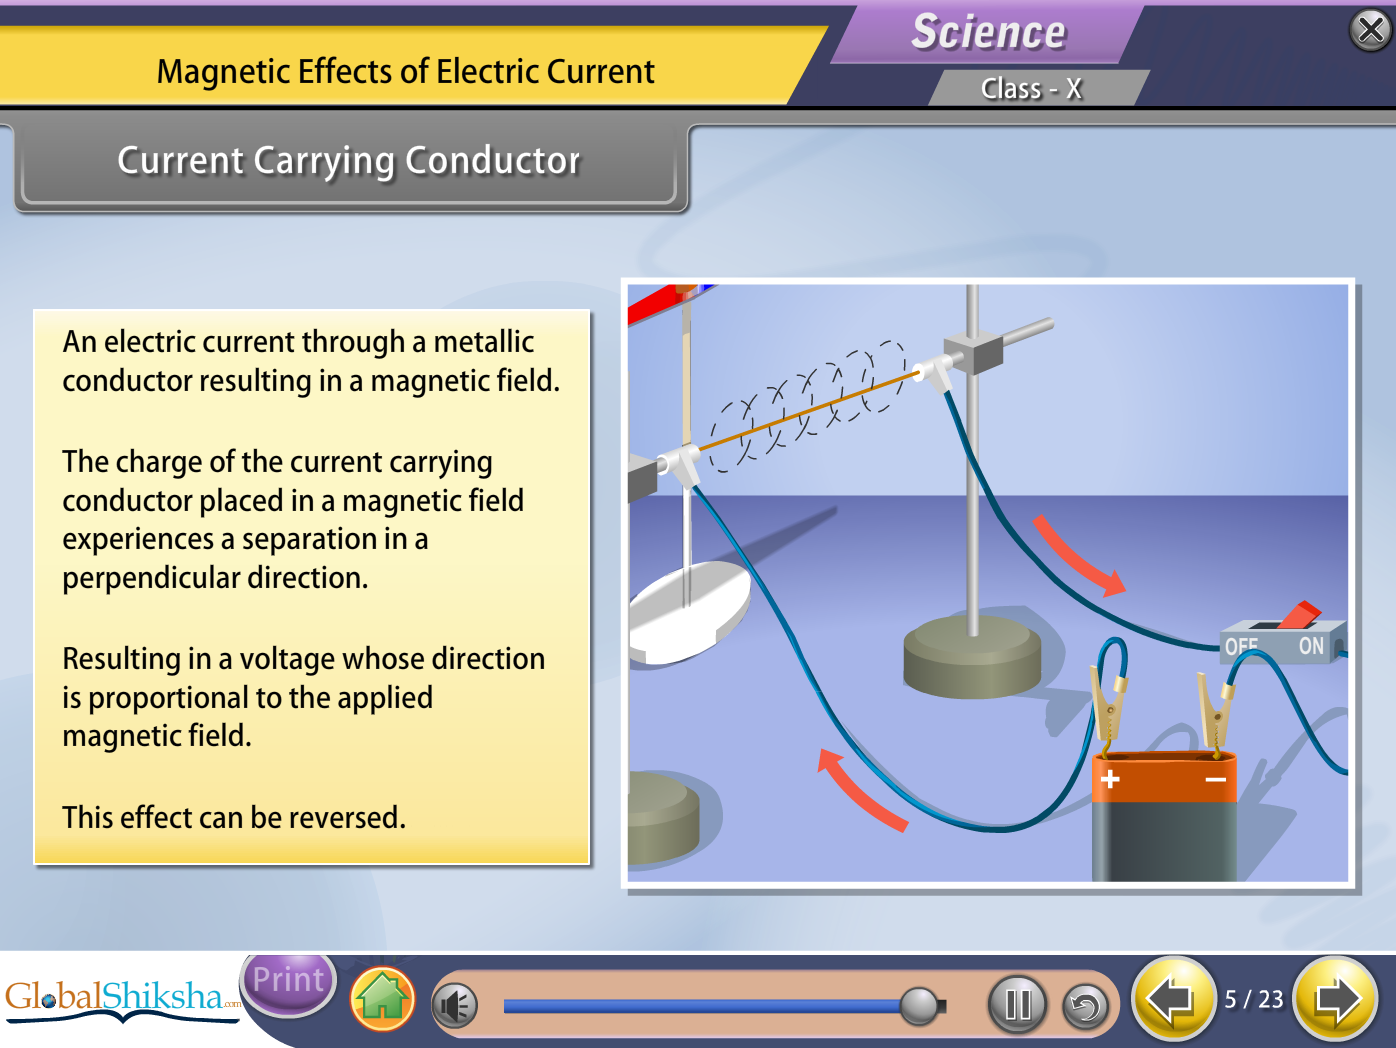 ICSE Class 10 Maths & Science Animated Pendrive in English